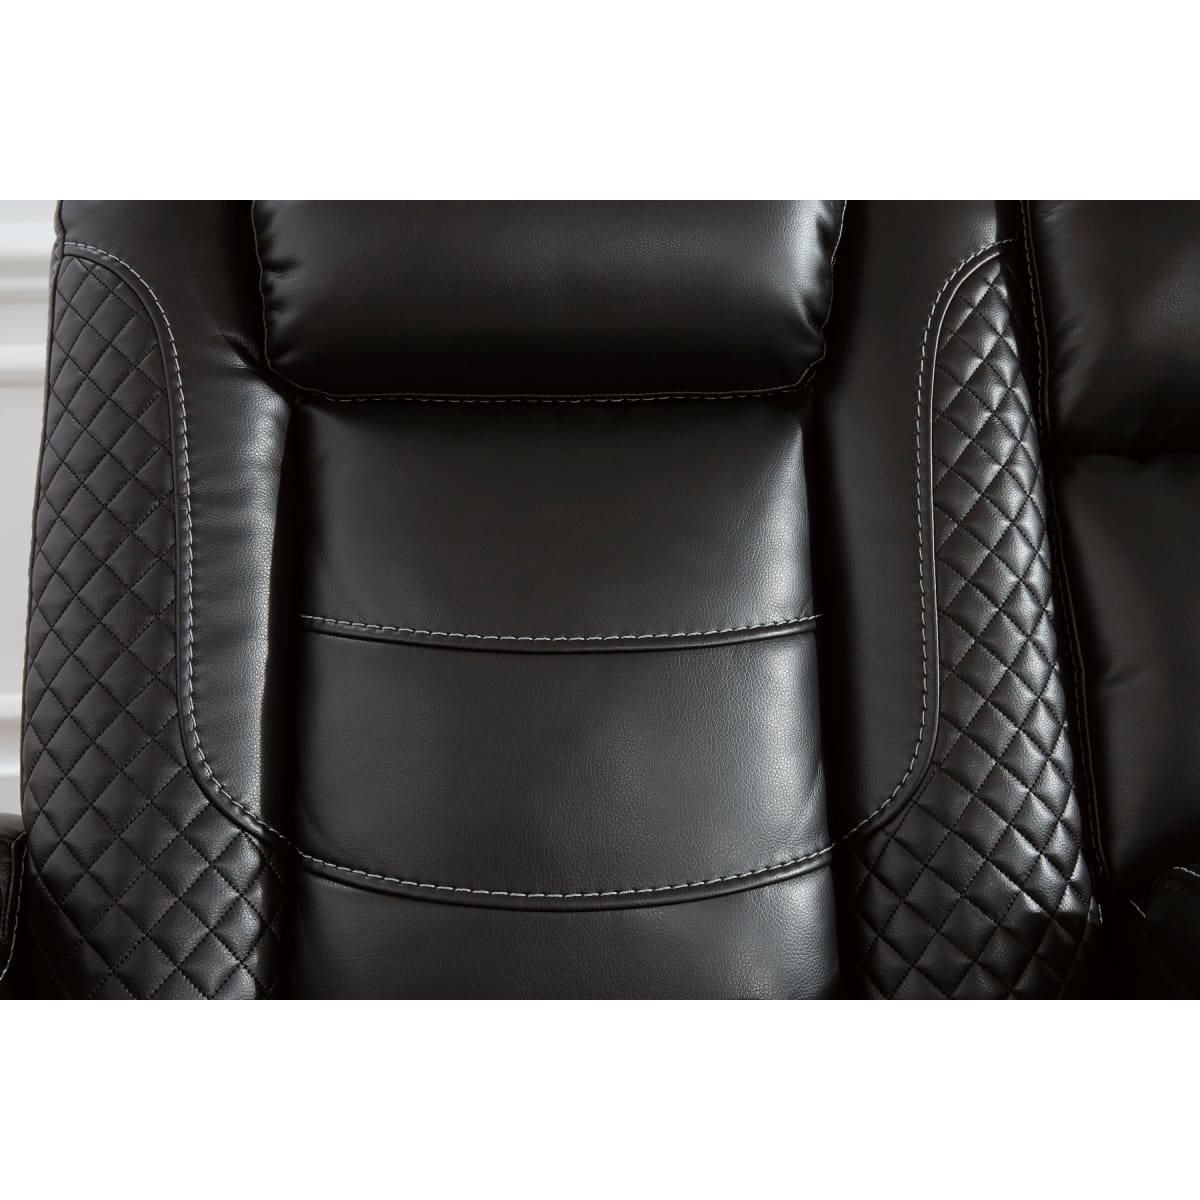 Party Time Power Reclining Loveseat with Console - Loveseat